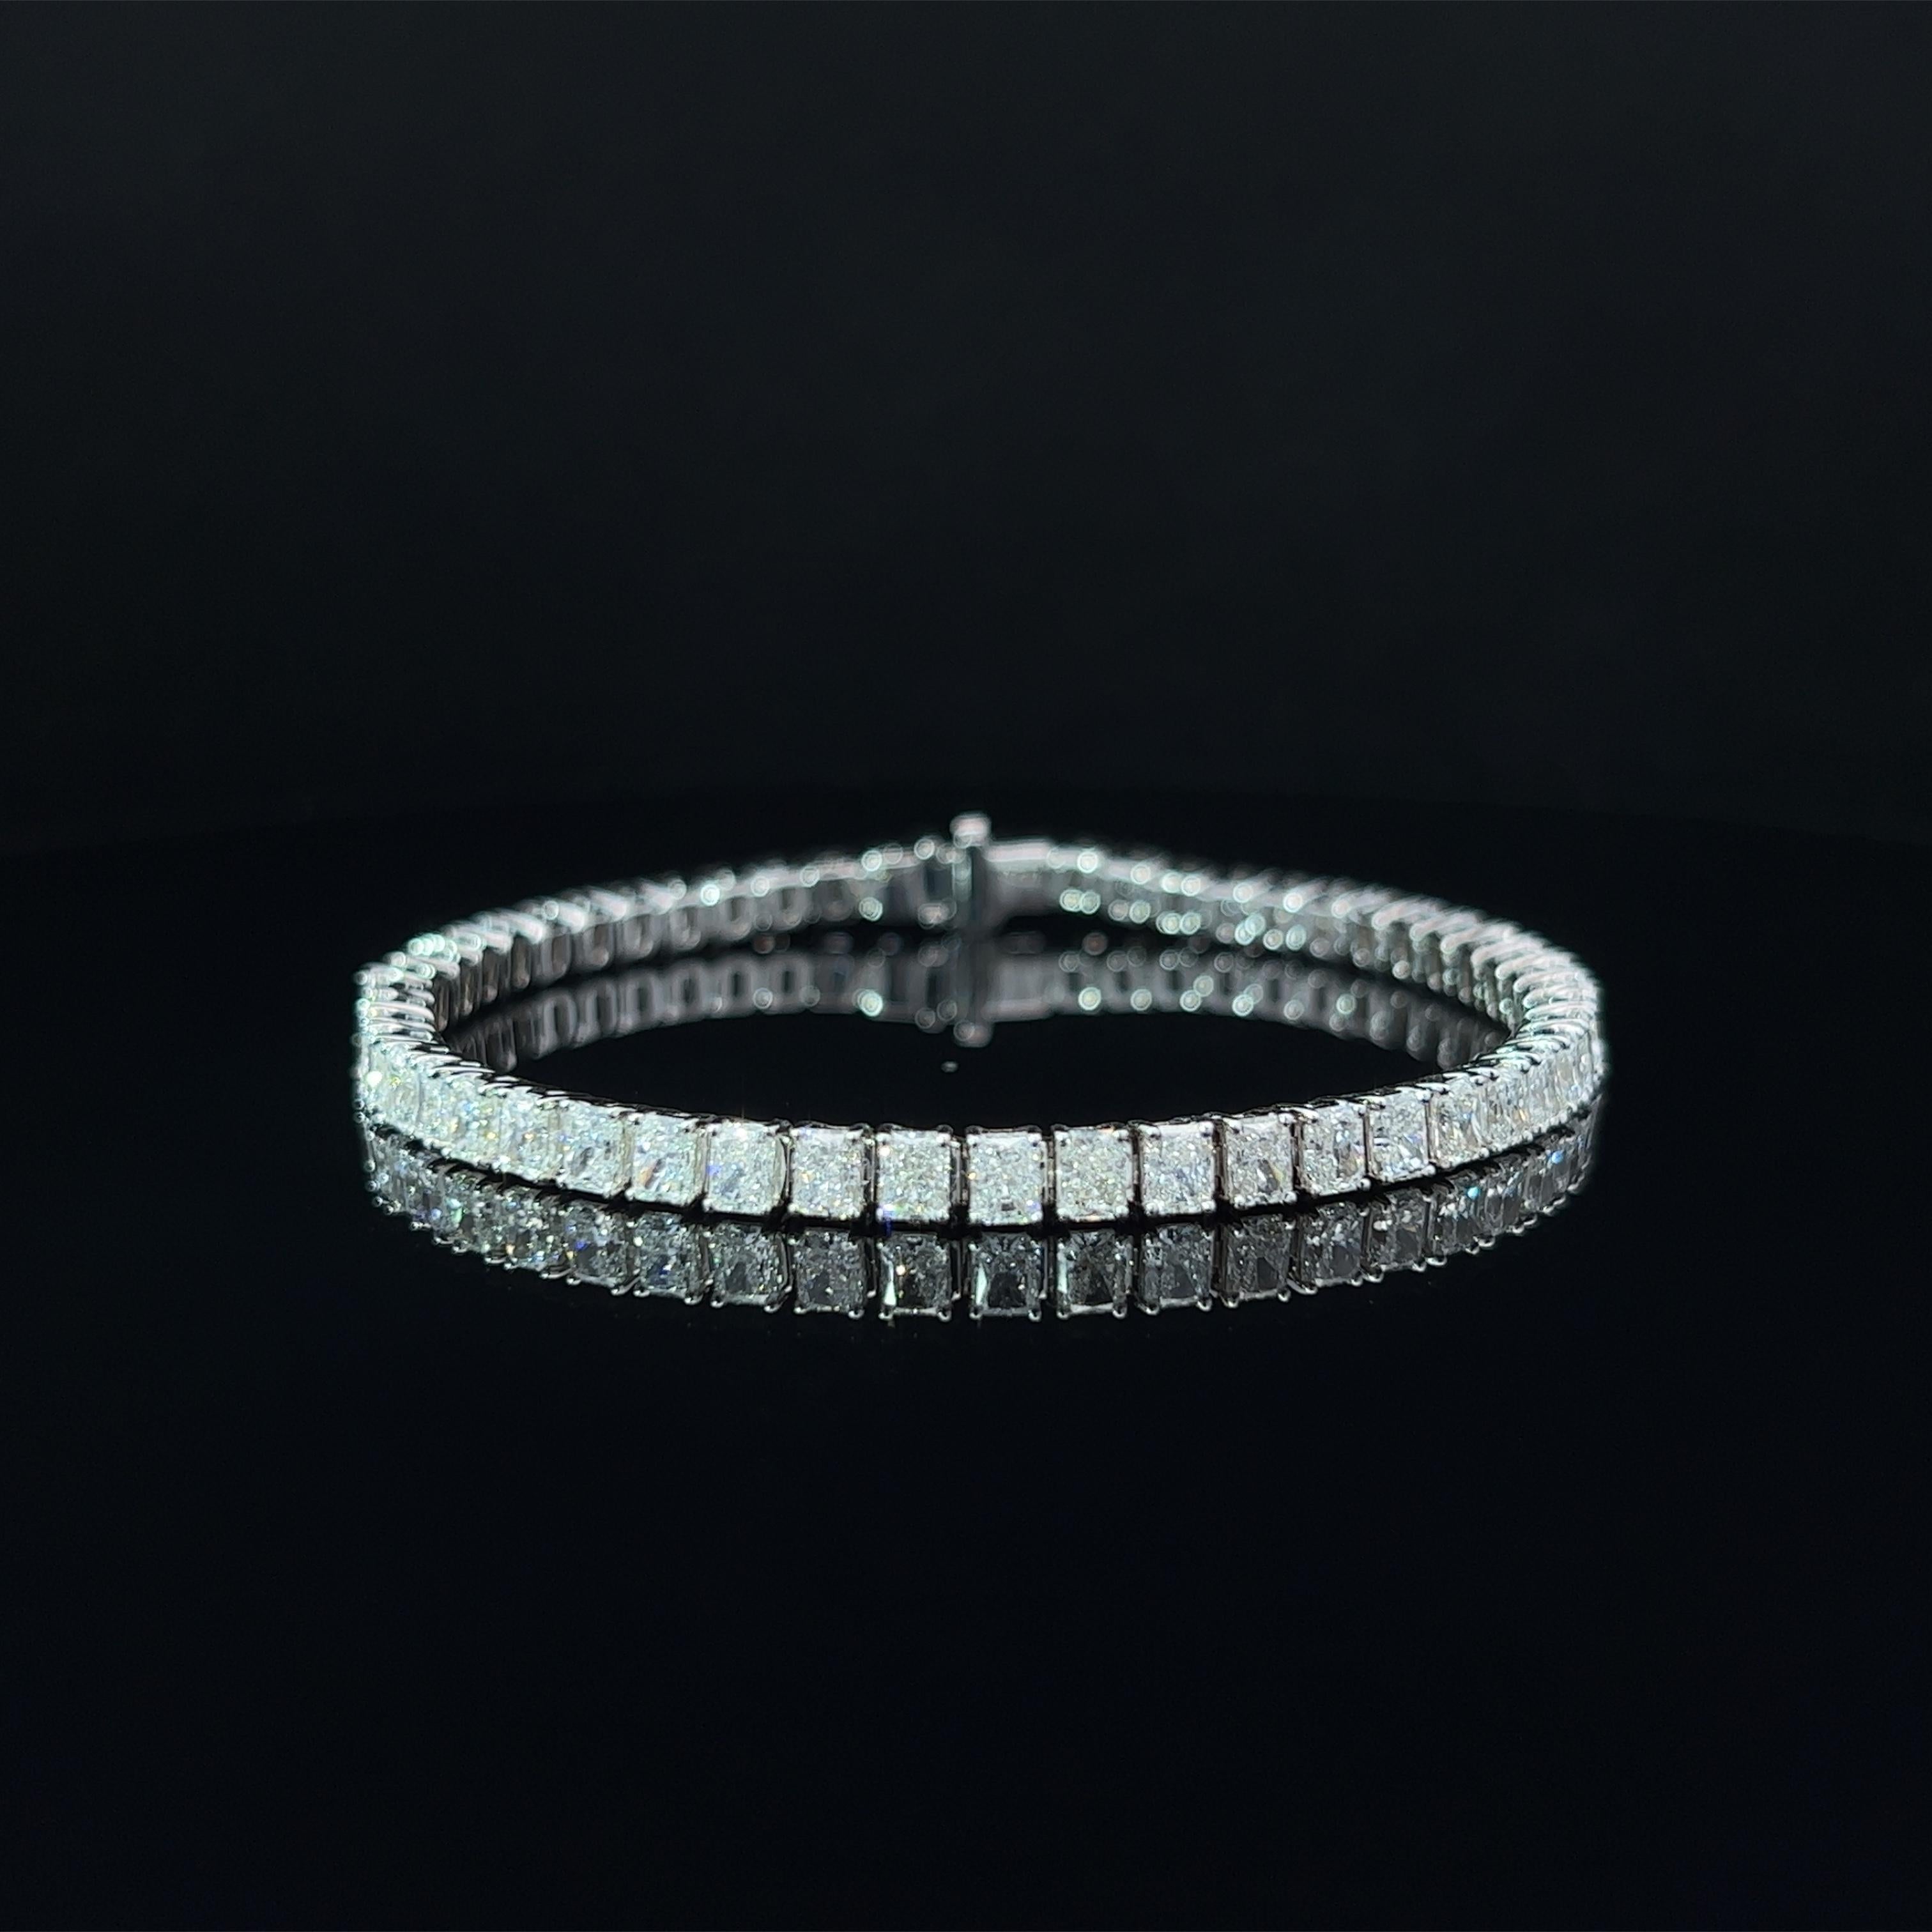 Diamond Shape: Radiant Cut 
Total Diamond Weight: 9.62ct
Individual Diamond Weight: .20ct
Color/Clarity: GH VVS  
Metal: 18K White Gold  
Metal Weight: 14.68g 

Key Features:

Radiant-Cut Diamonds: The centerpiece of this bracelet features a